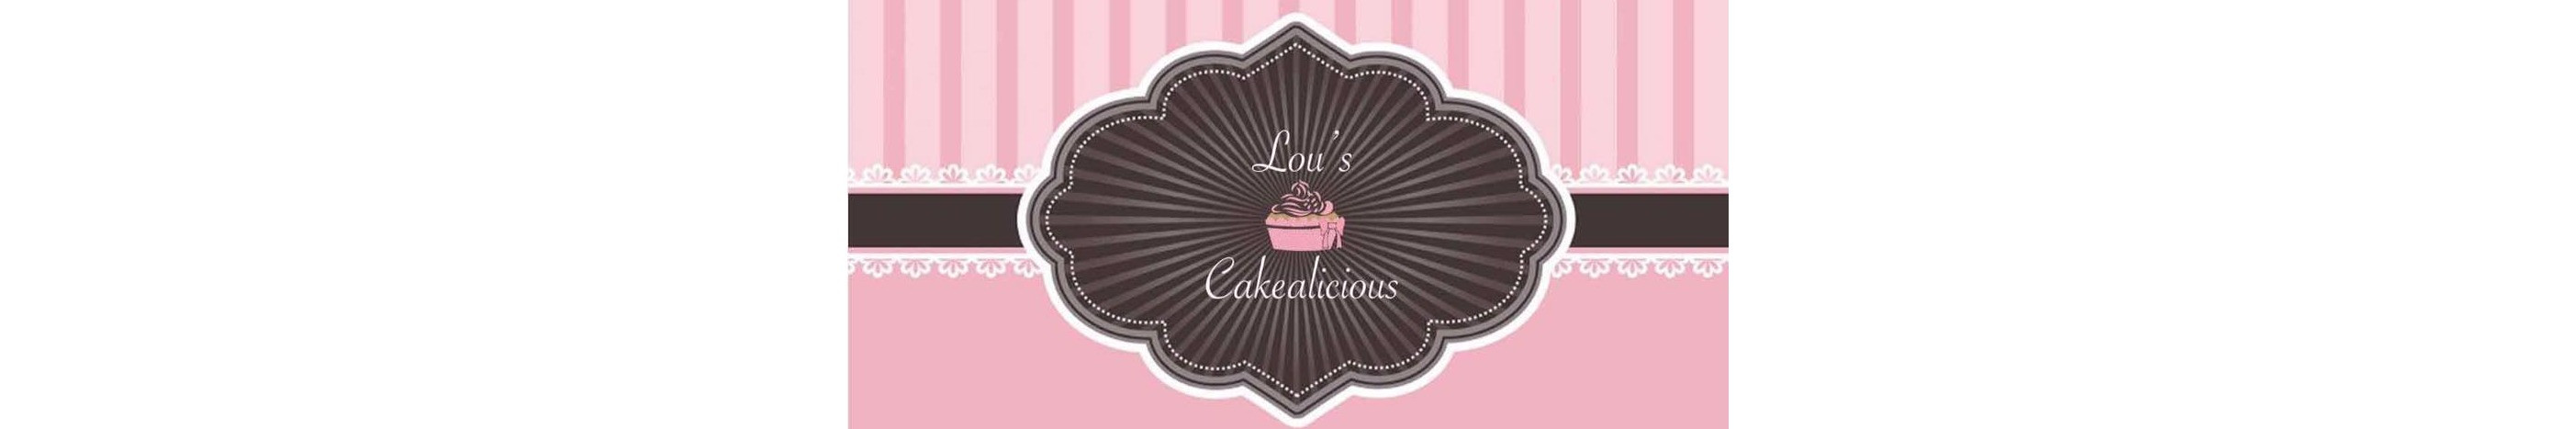 Lou's Cakealicious - Hand crafted cakes